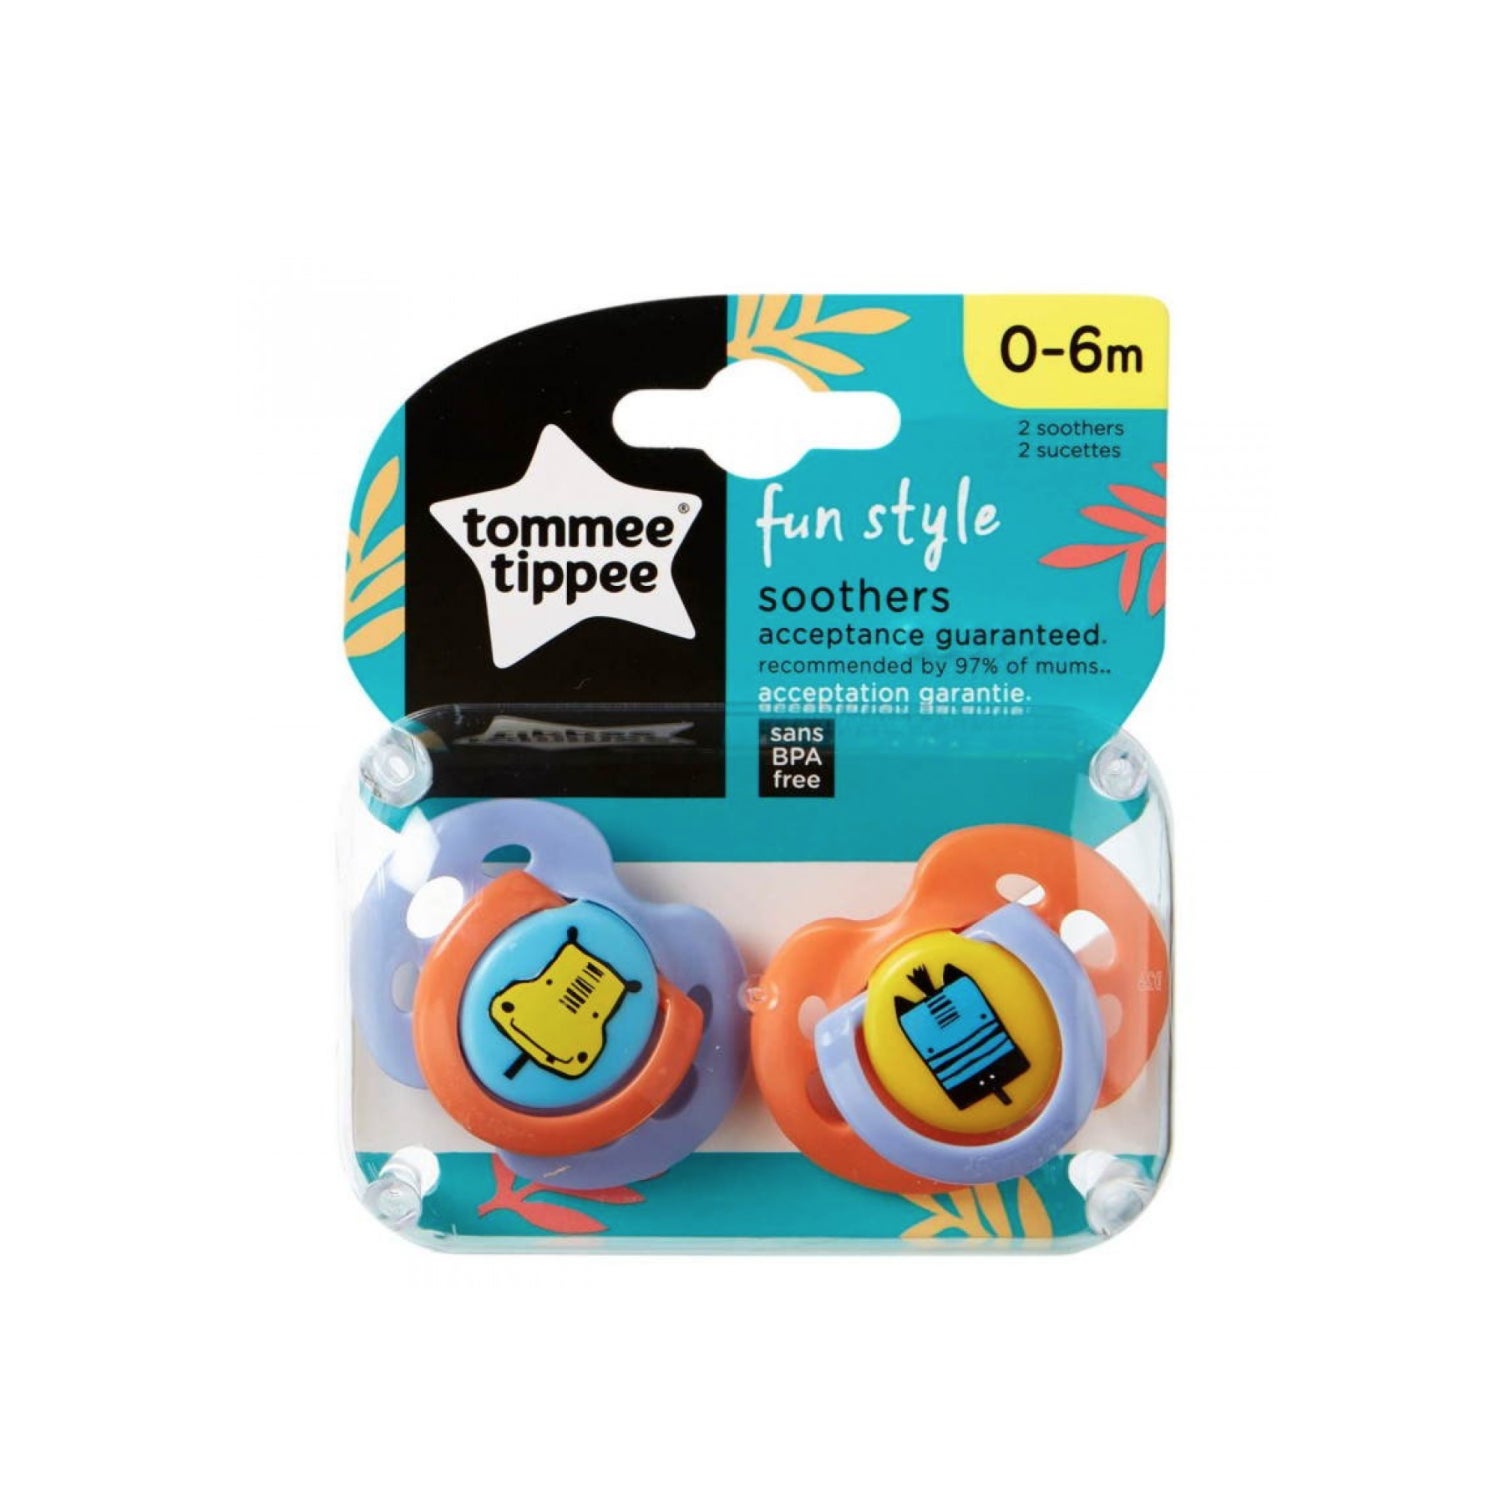 Chupete Advanced Sensitive de Tommee Tippee 0-6 meses (2 uds.)